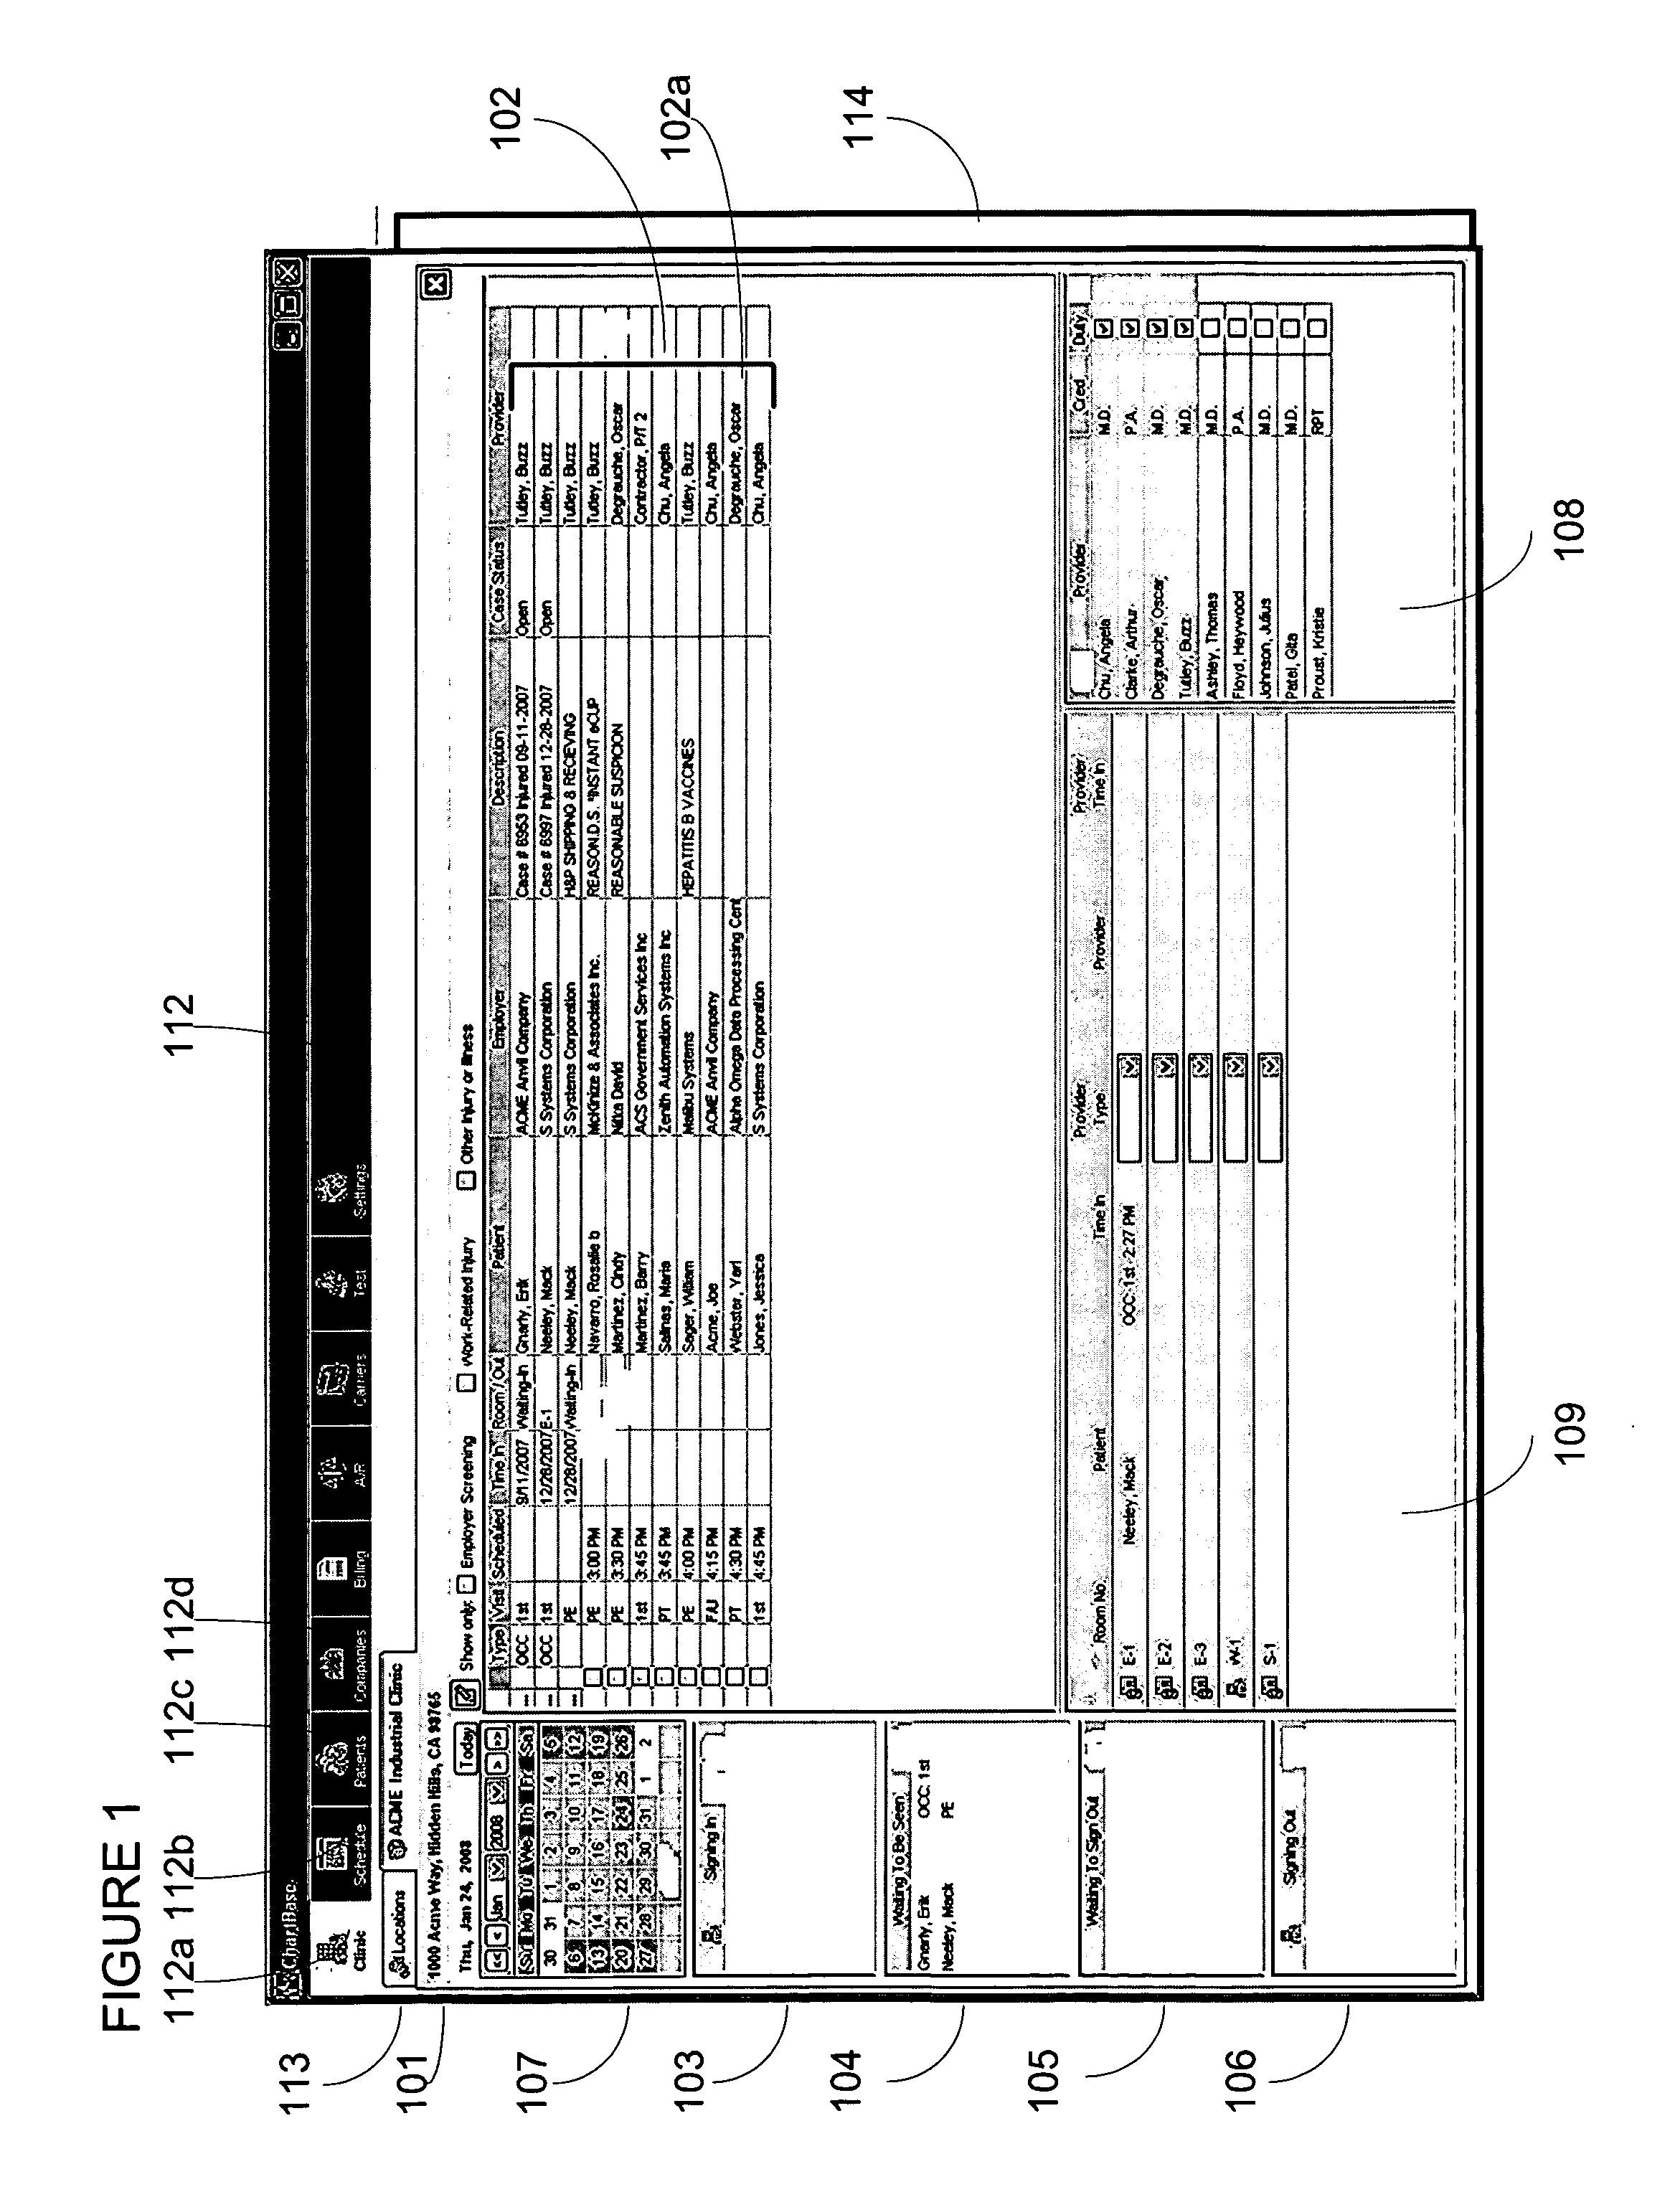 System and method for integrating locational awareness into a subject oriented workflow